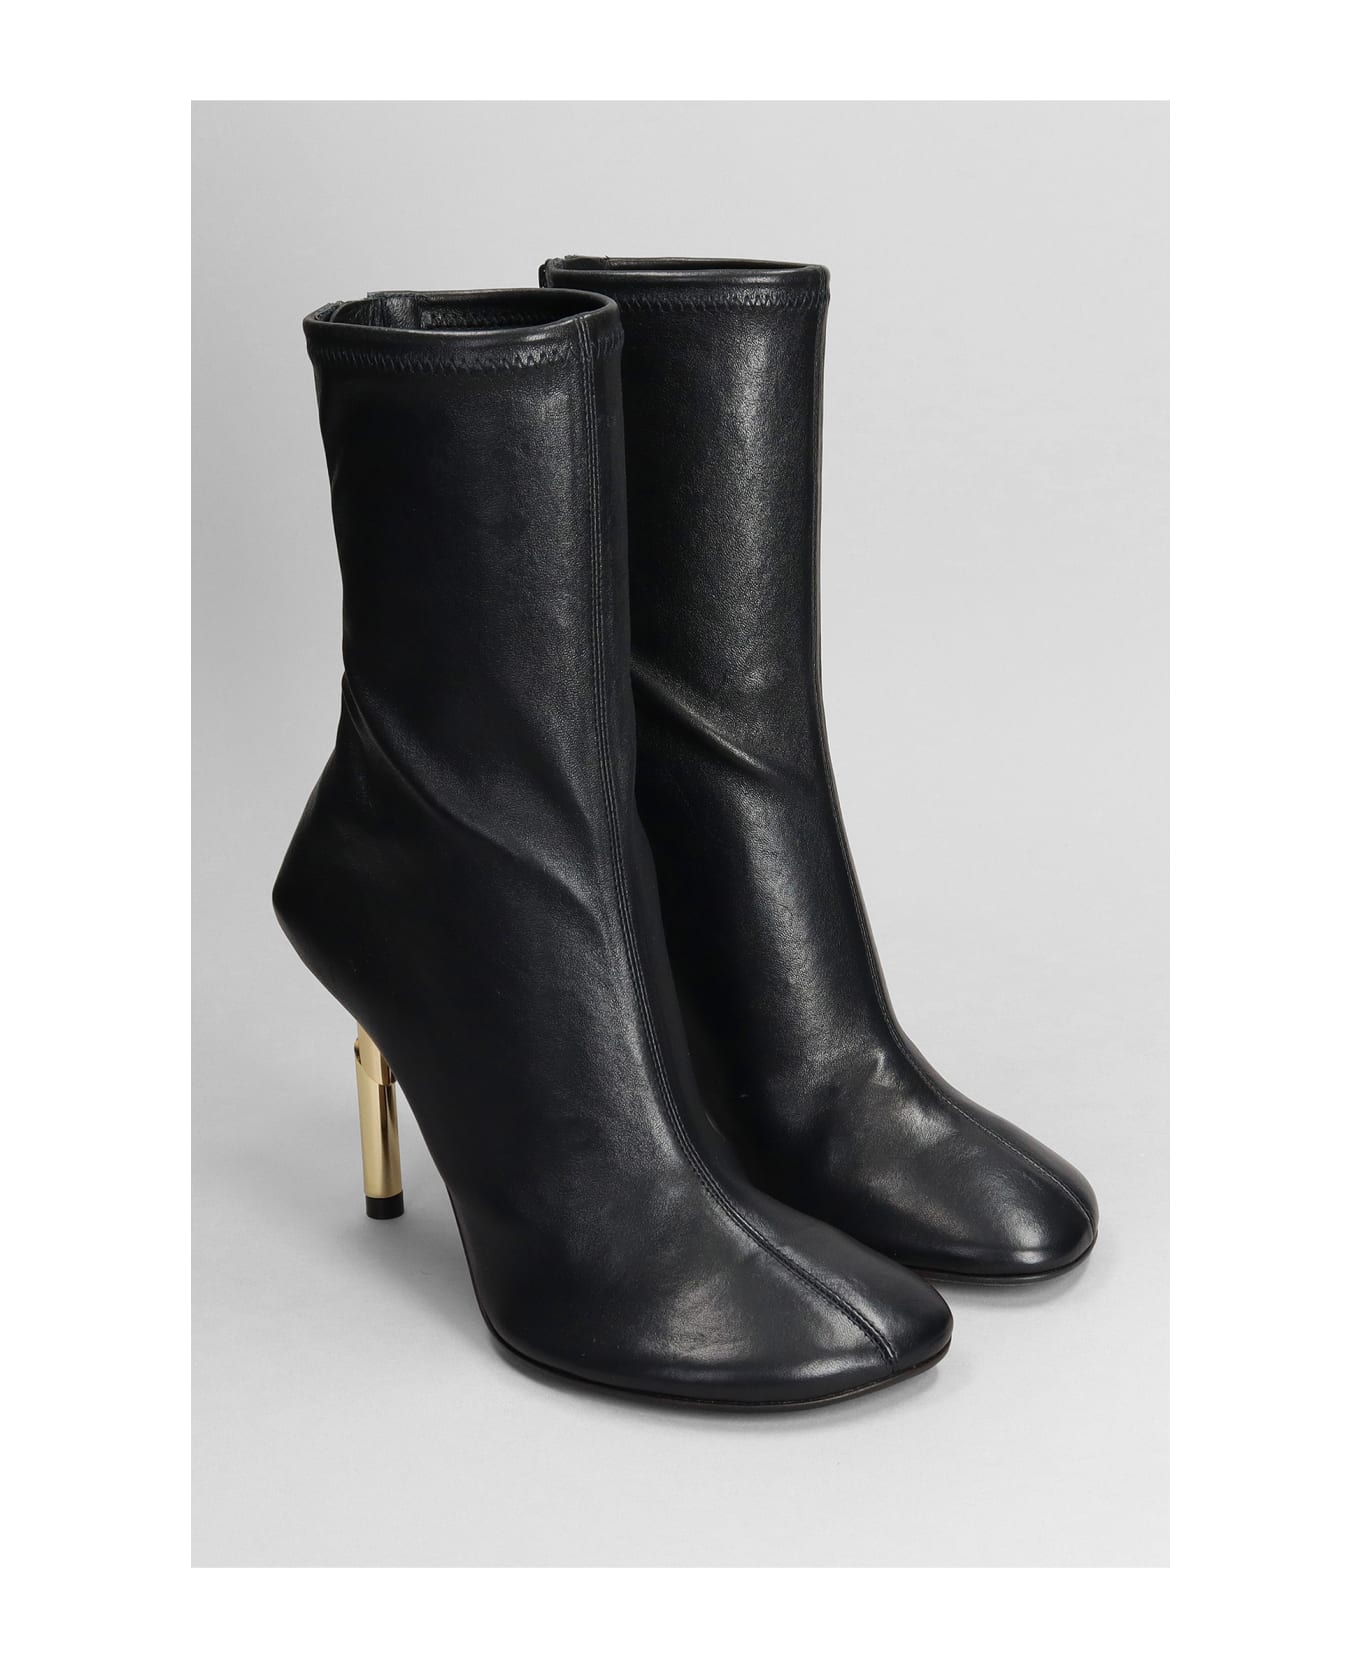 Lanvin High Heels Ankle Boots In Black Leather - black